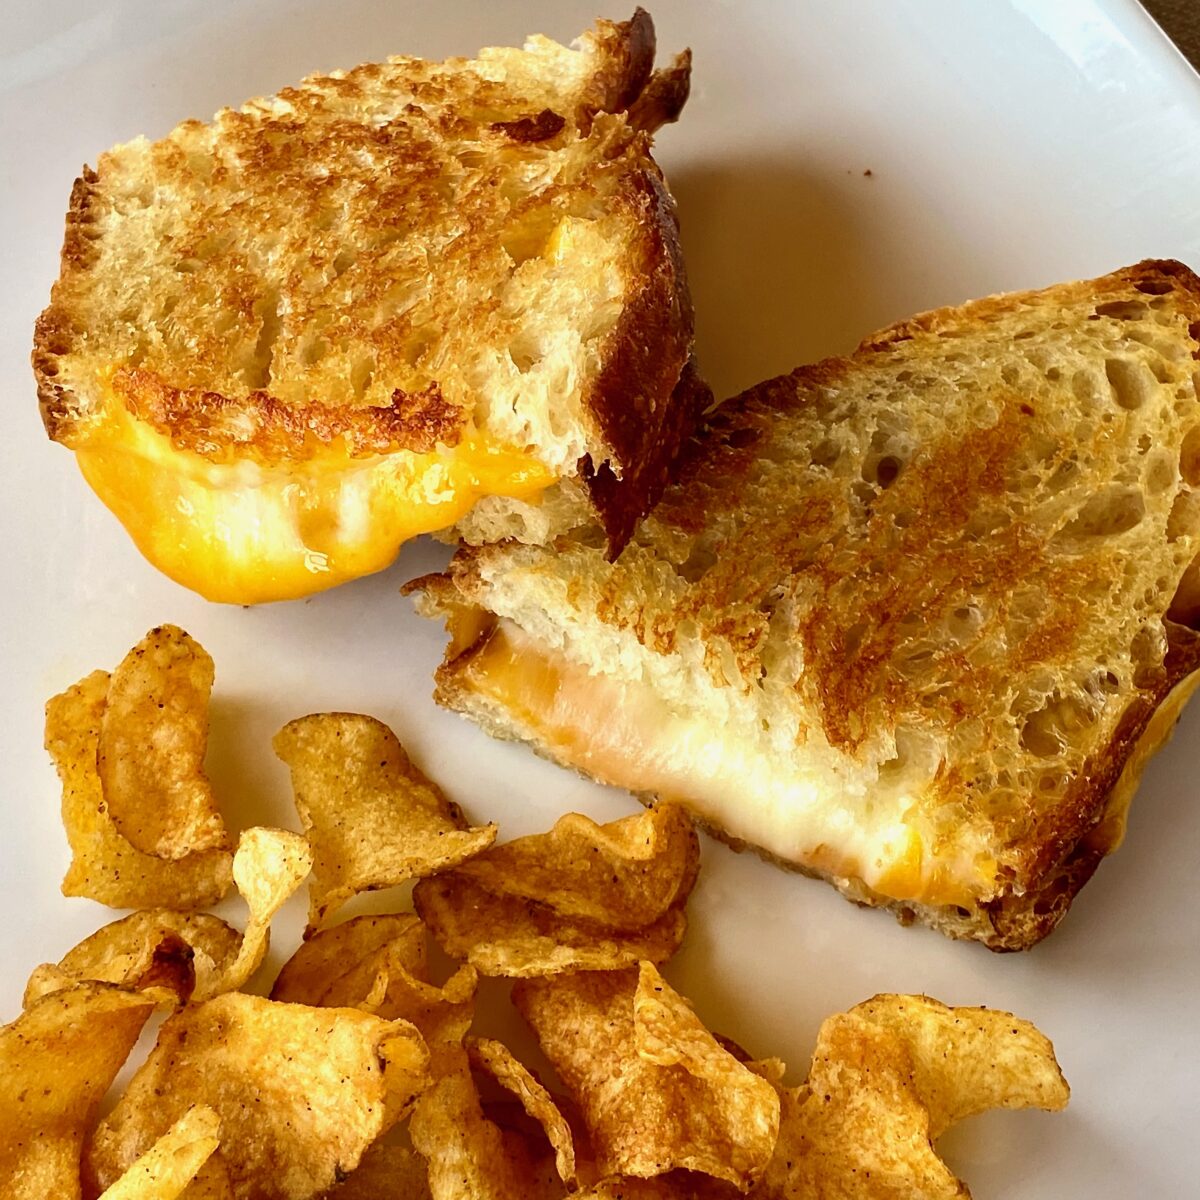 A perfectly melty, brown, and crisp grilled cheese on a plate with kettle chips.